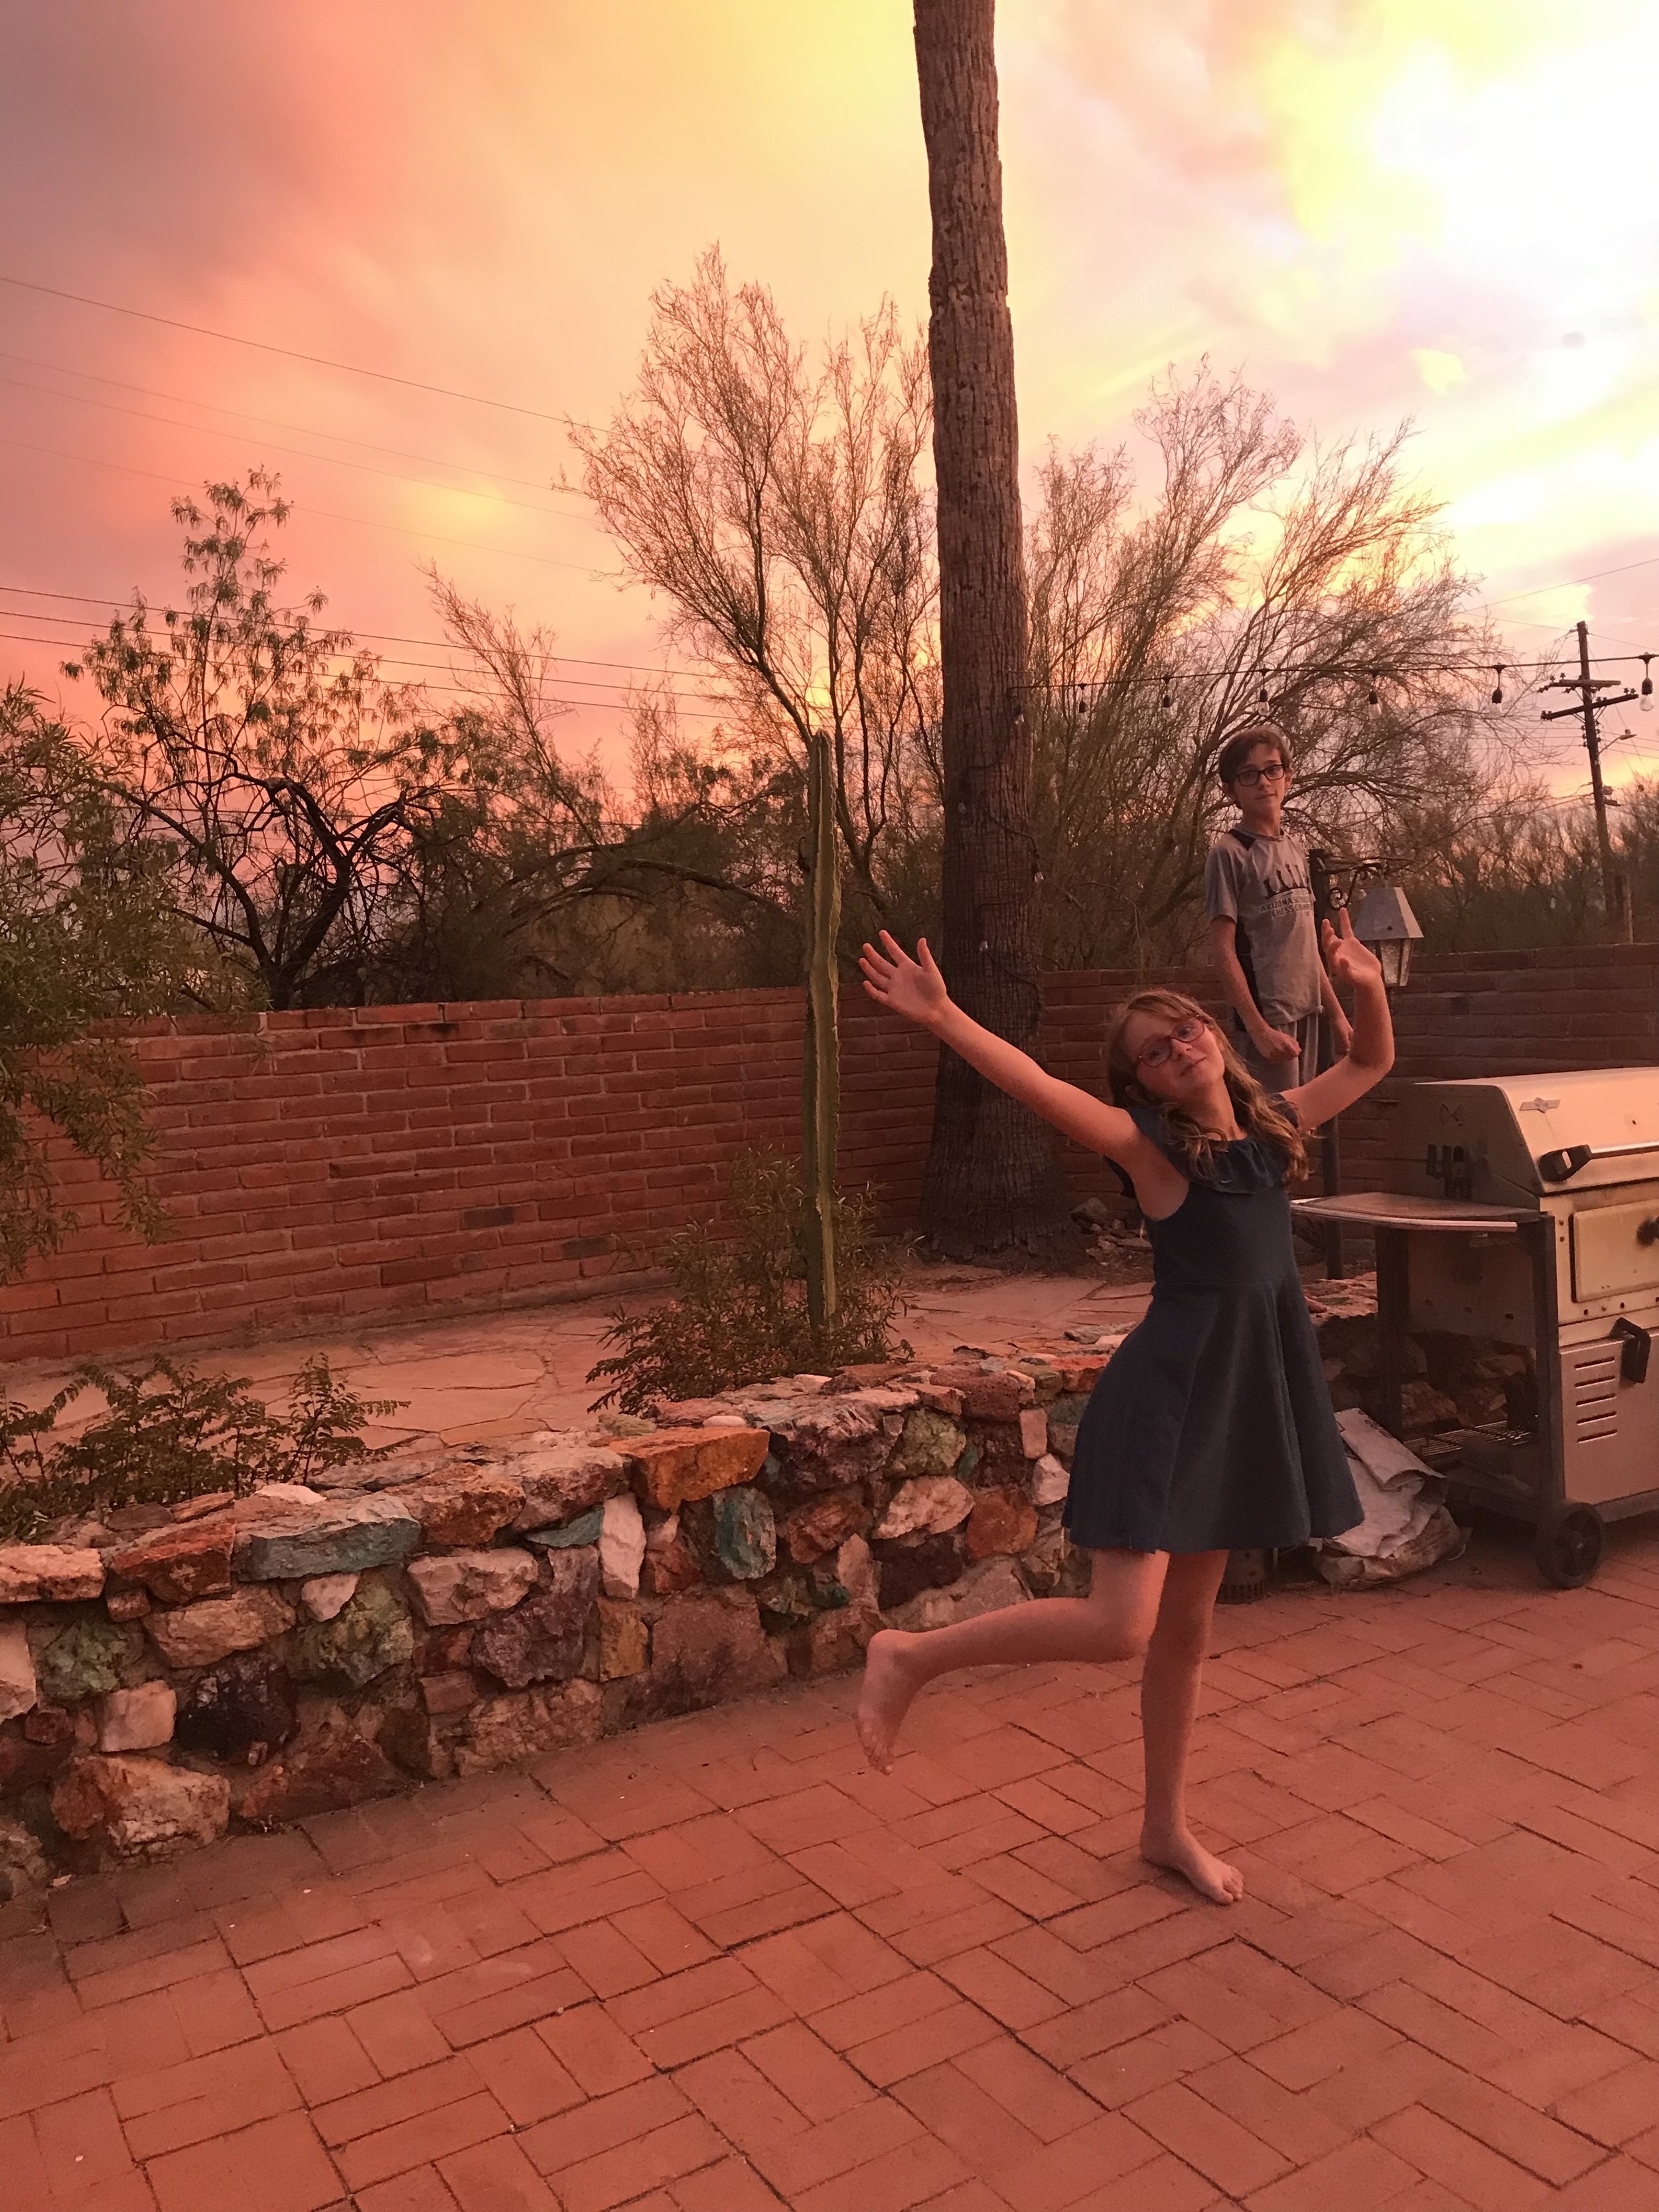  Sunsets during monsoon season in southern Arizona are magical. My children, Gus and Cora, celebrate the sky. 